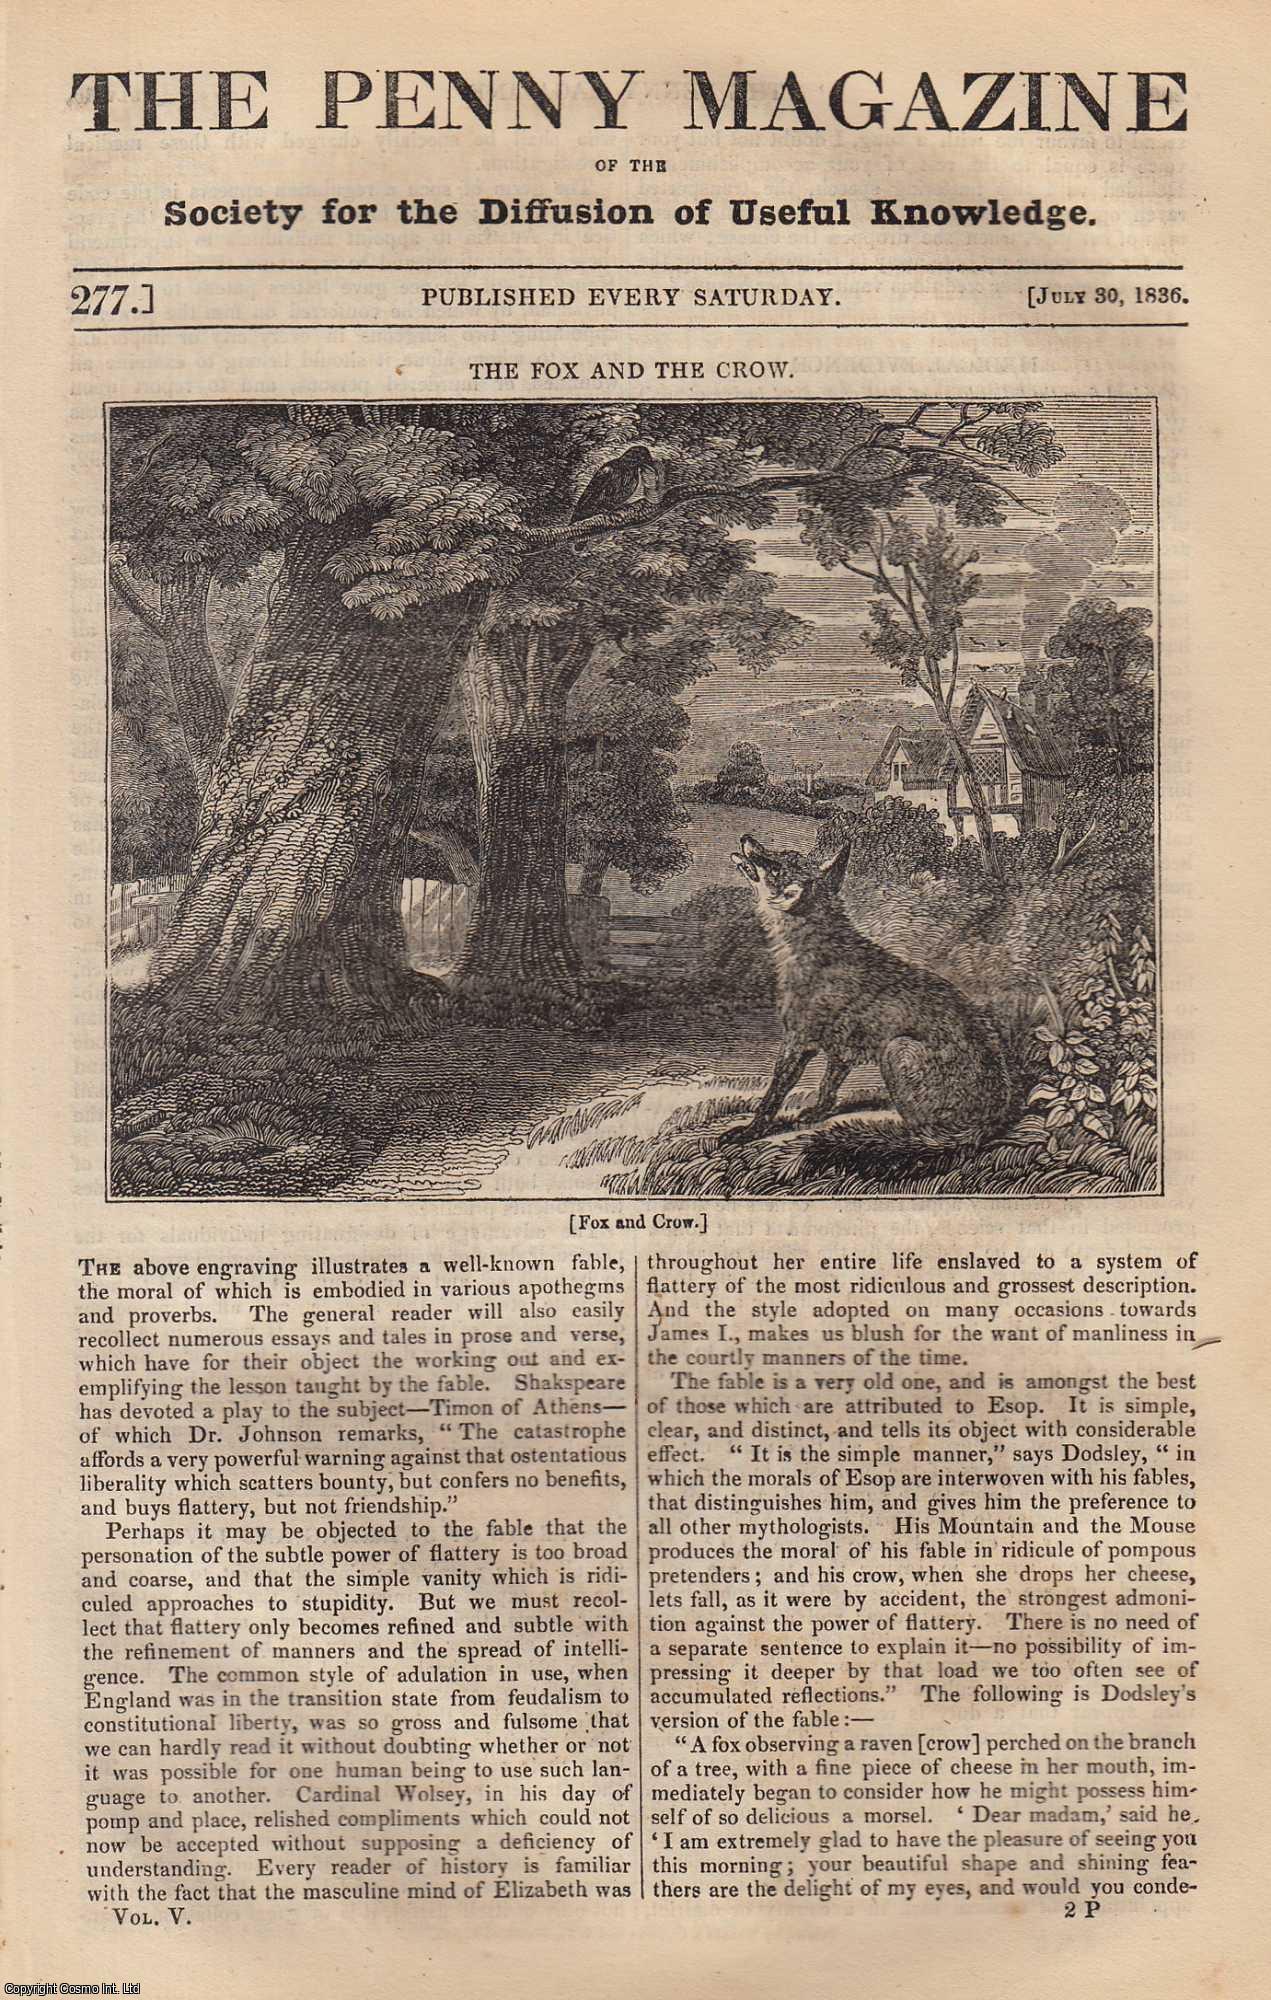 Penny Magazine - The Fox and The Crow; Feats of Swimming and Diving; English Coins (part 3); Winchester Market-Cross, etc. Issue No. 277, 1836. A complete original weekly issue of the Penny Magazine, 1836.